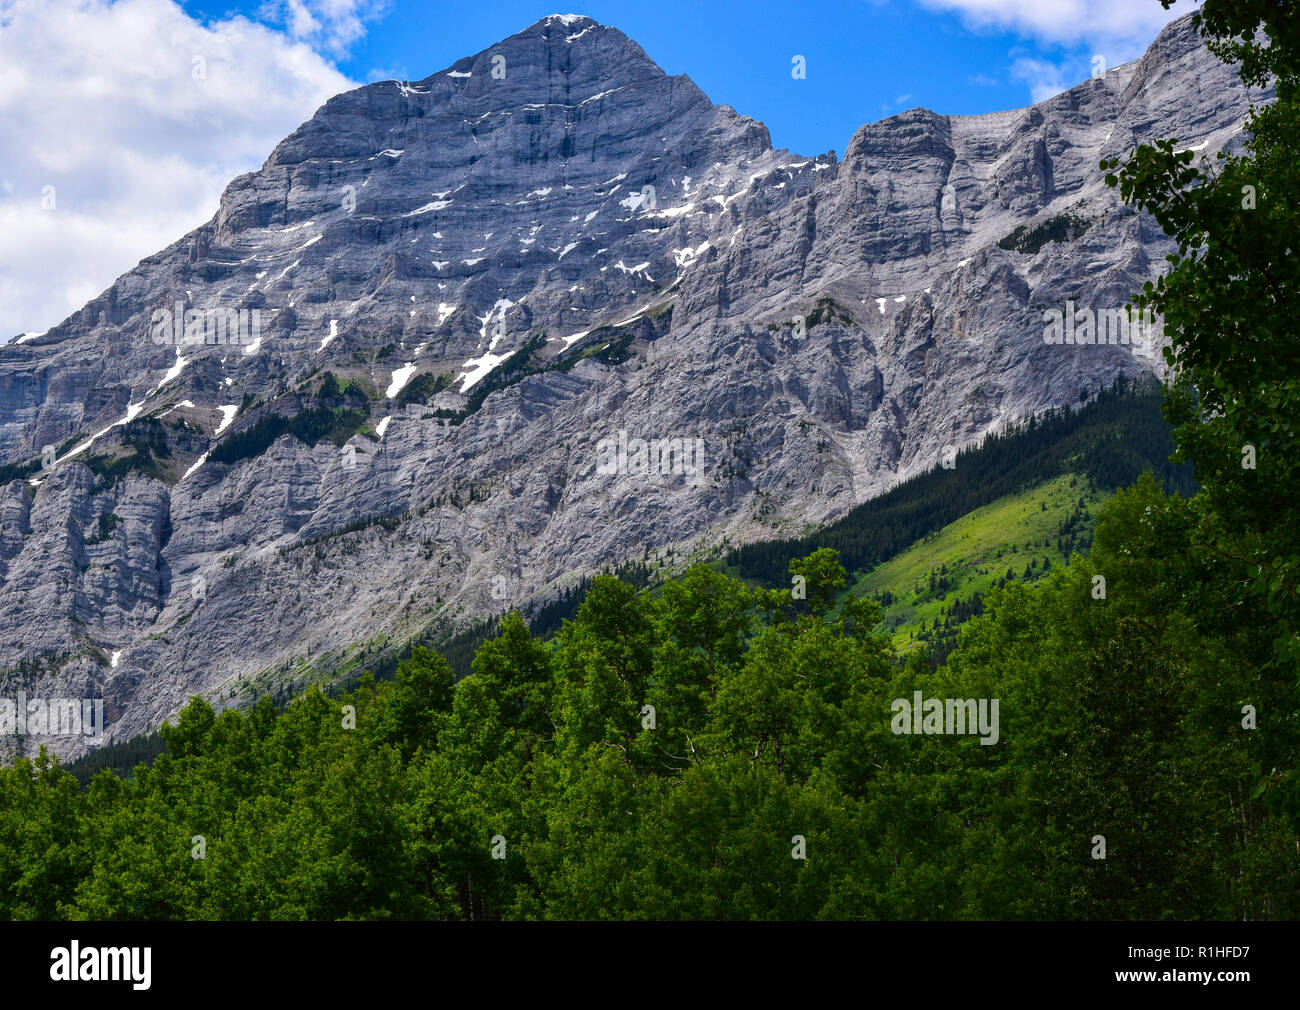 peaks, valleys, meadows  and other scenery in the Rocky mountains of Canada Stock Photo